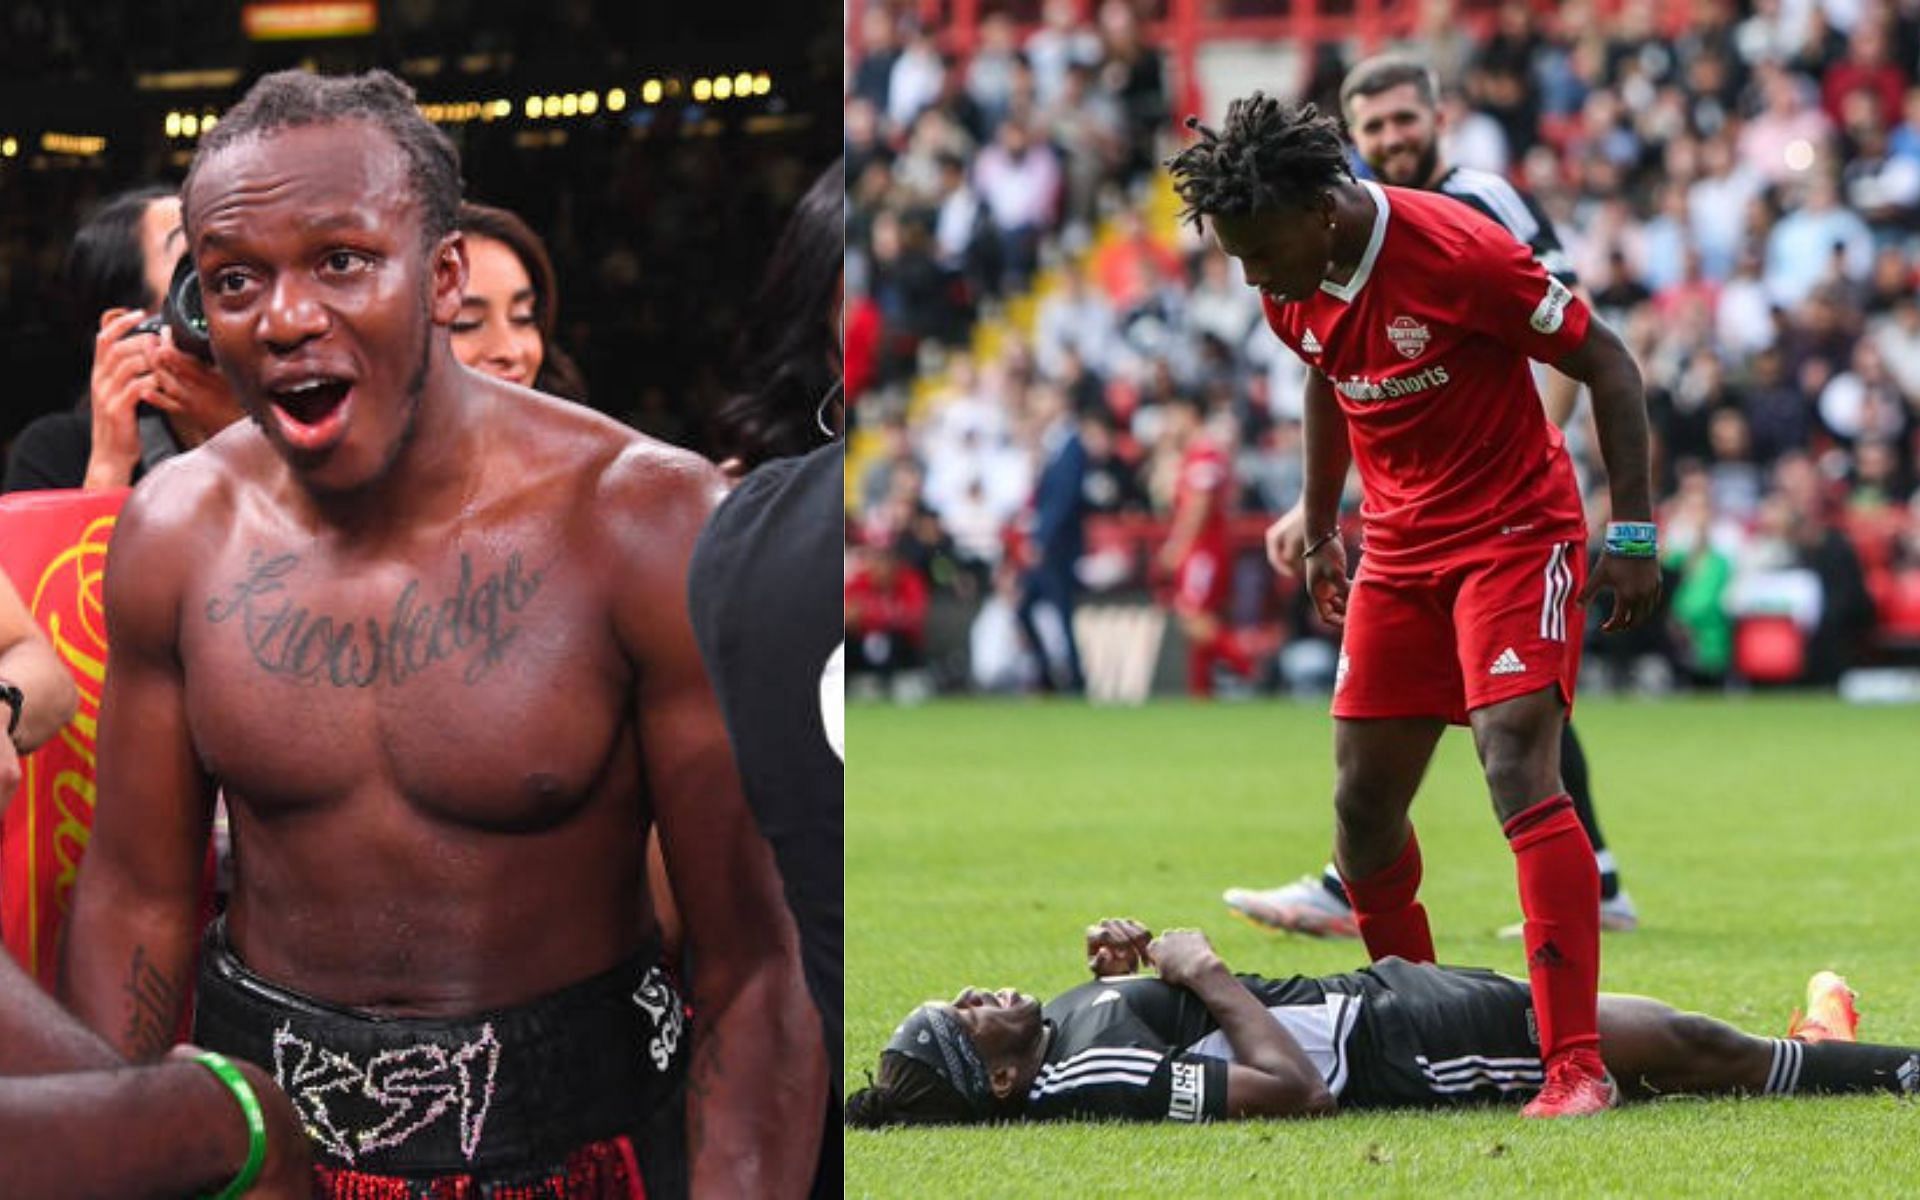 KSI (left) and IShowSpeed standing over KSI after tackling him (right) (Image credits Getty Images and @SpeedUpdates1 on Twitter )